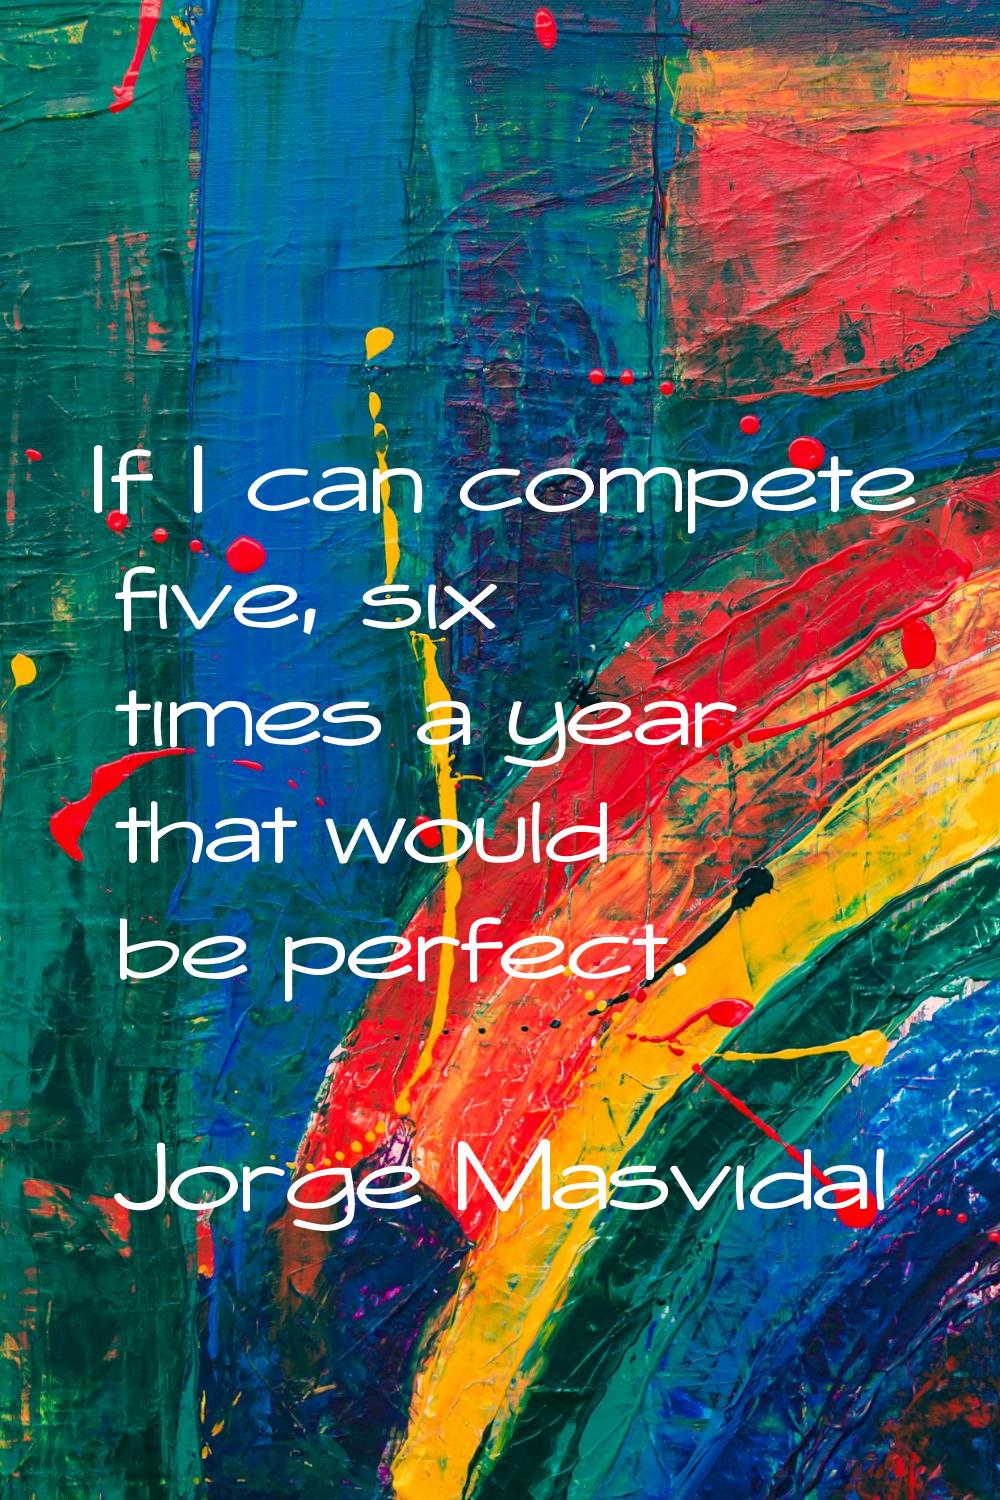 If I can compete five, six times a year that would be perfect.